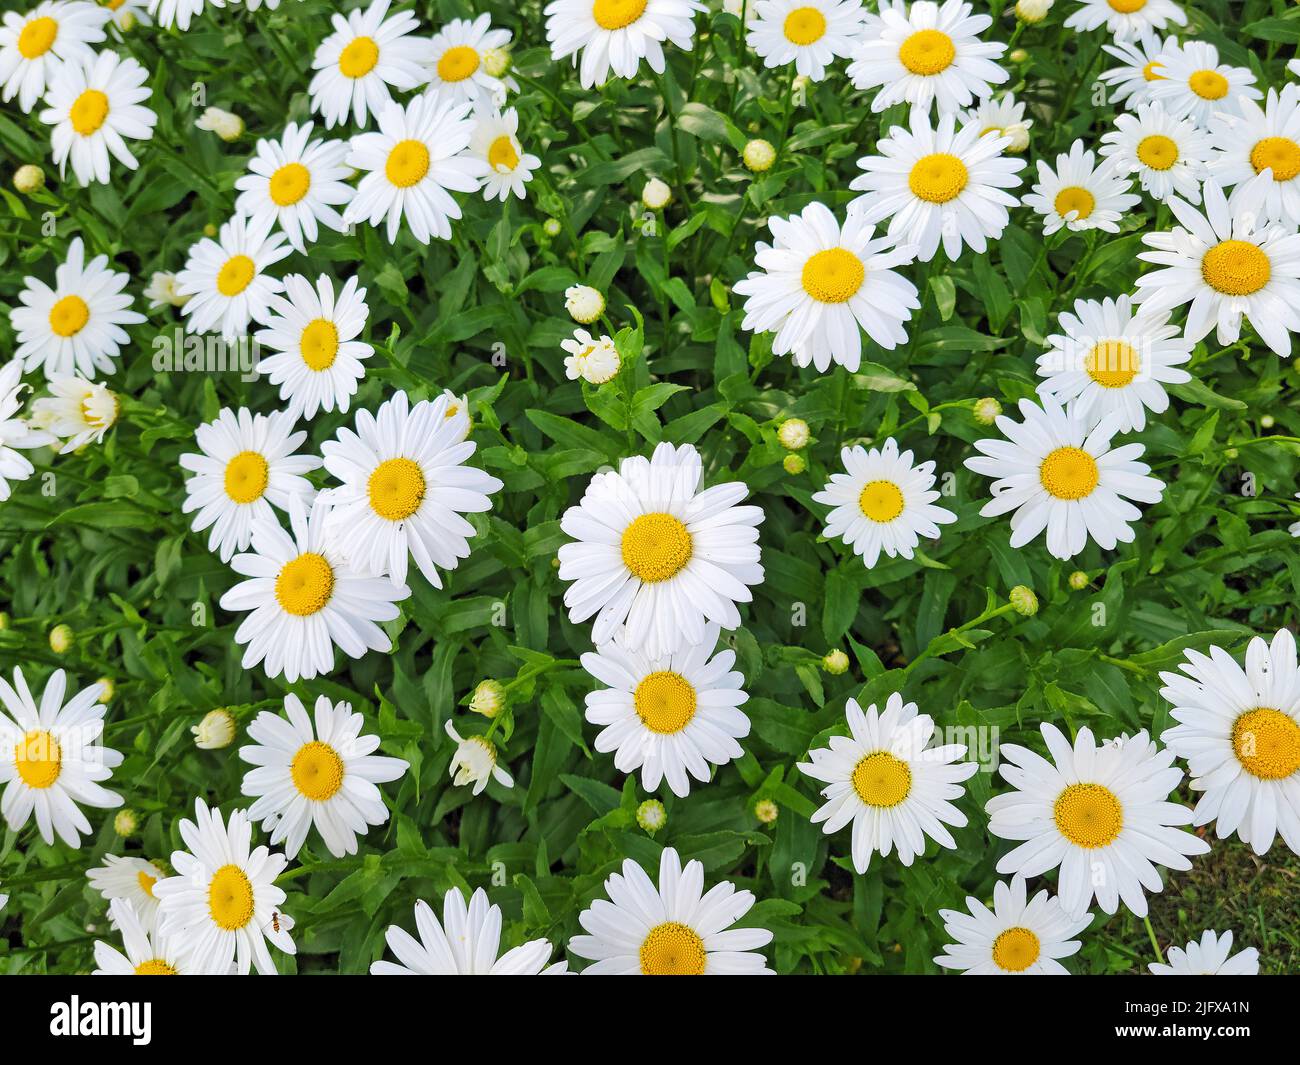 Close up of fresh white daisies in a summer garden Stock Photo